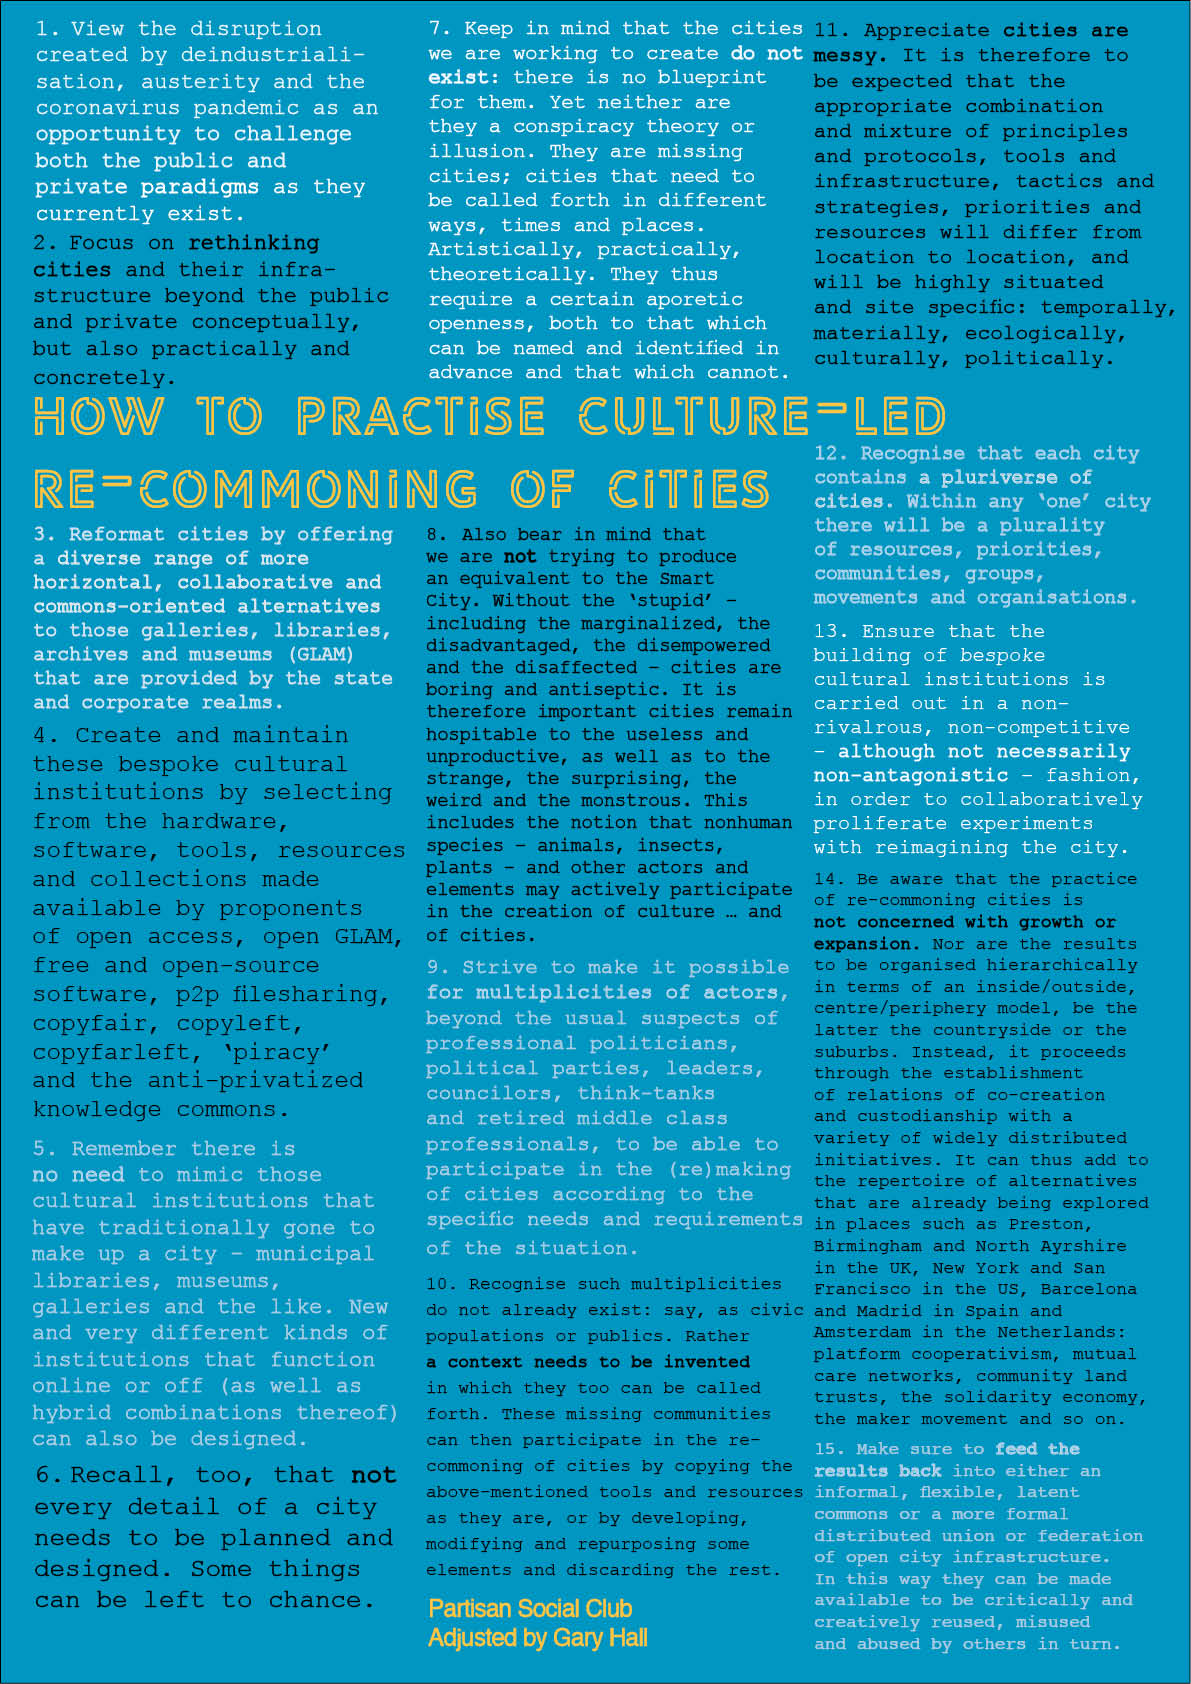 A poster about How to practise culture-led re-commoning of cities